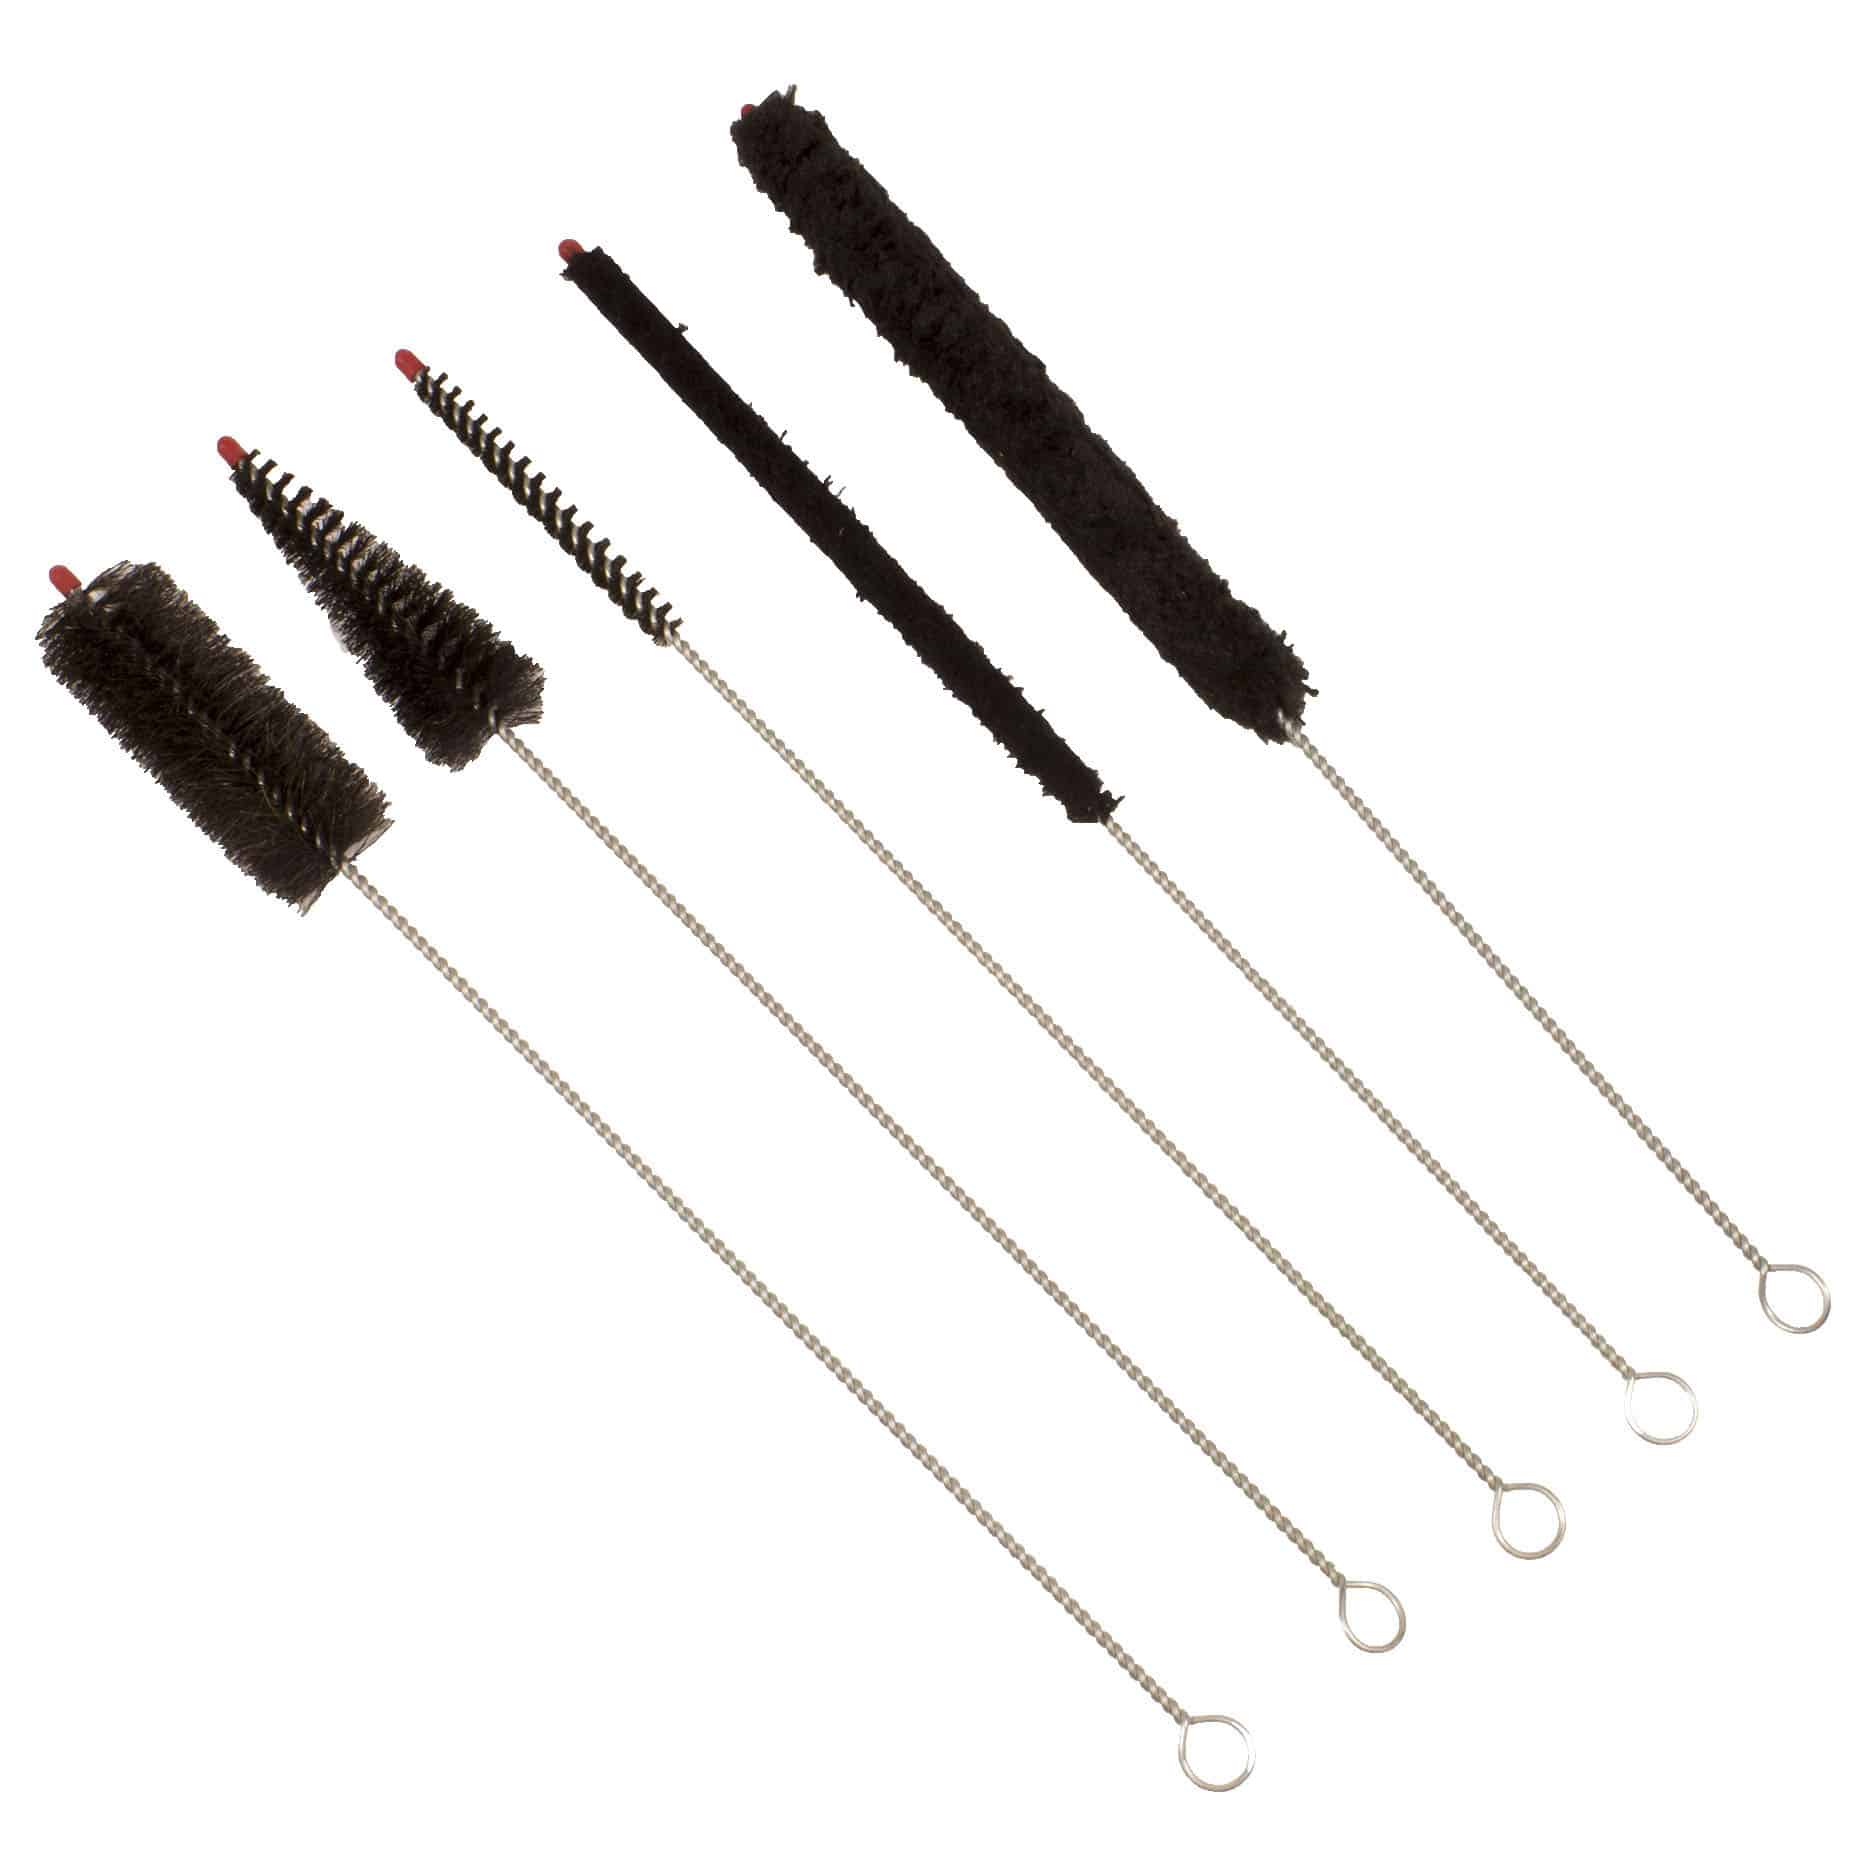 Shows 5 different shaped brushes for bagpipe parts